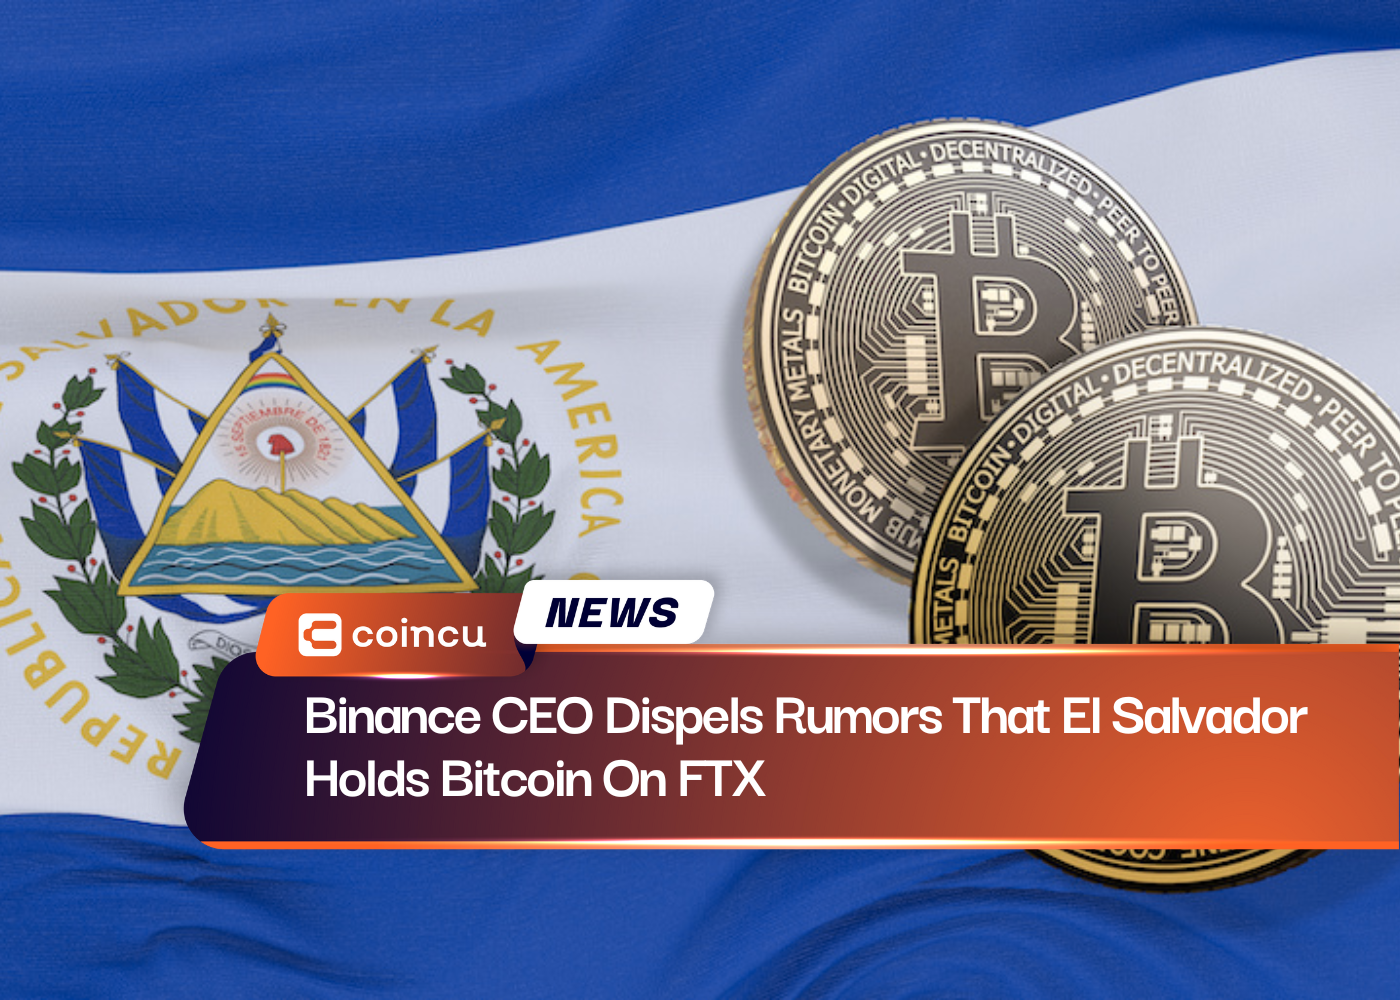 Binance CEO Dispels Rumors That El Salvador Holds Bitcoin On FTX